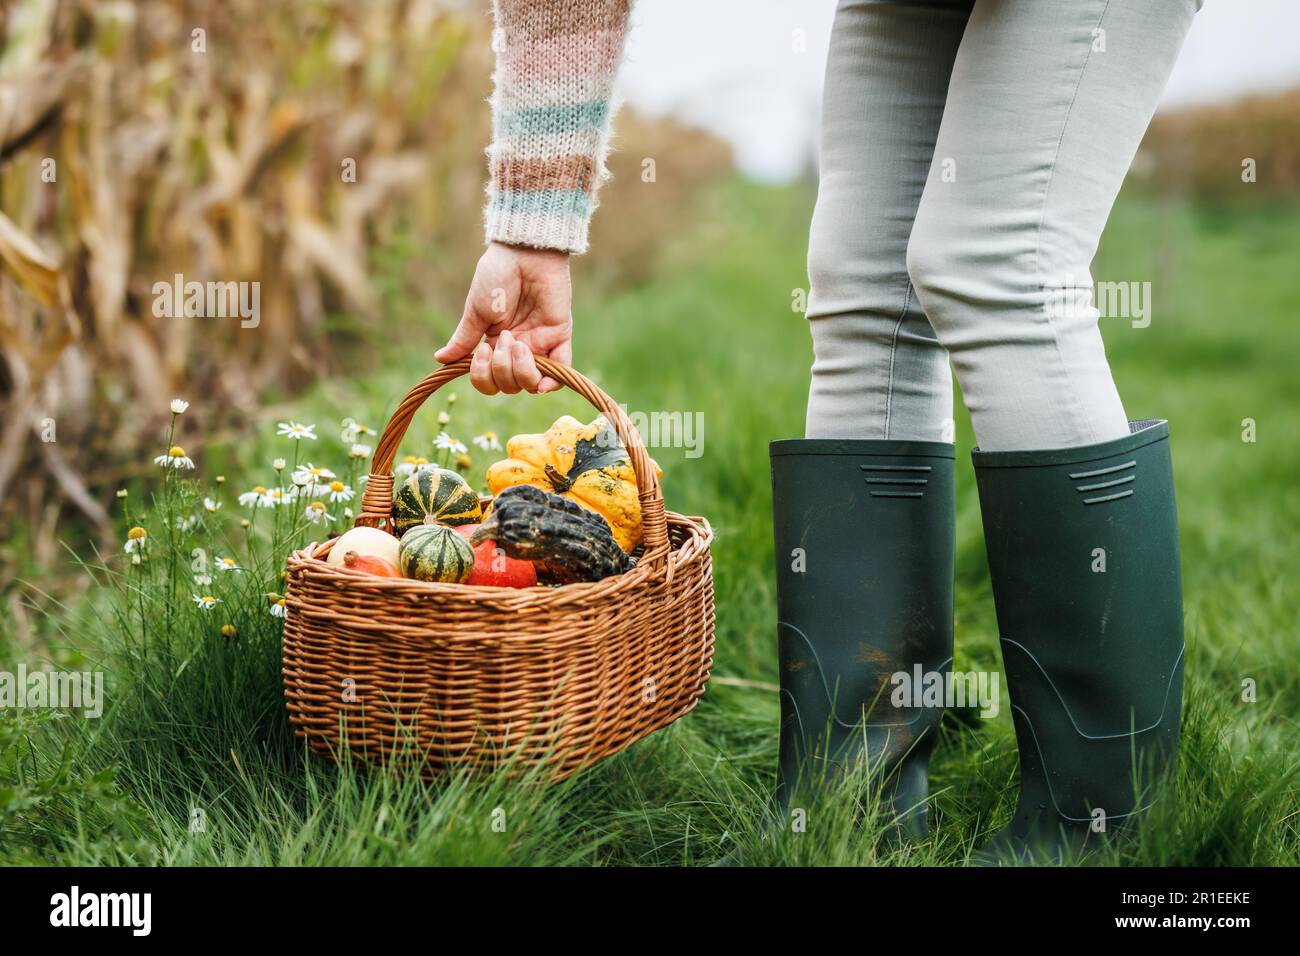 Woman picking basket with harvested decorative pumpkins in corn field. Female legs with rubber boots Stock Photo